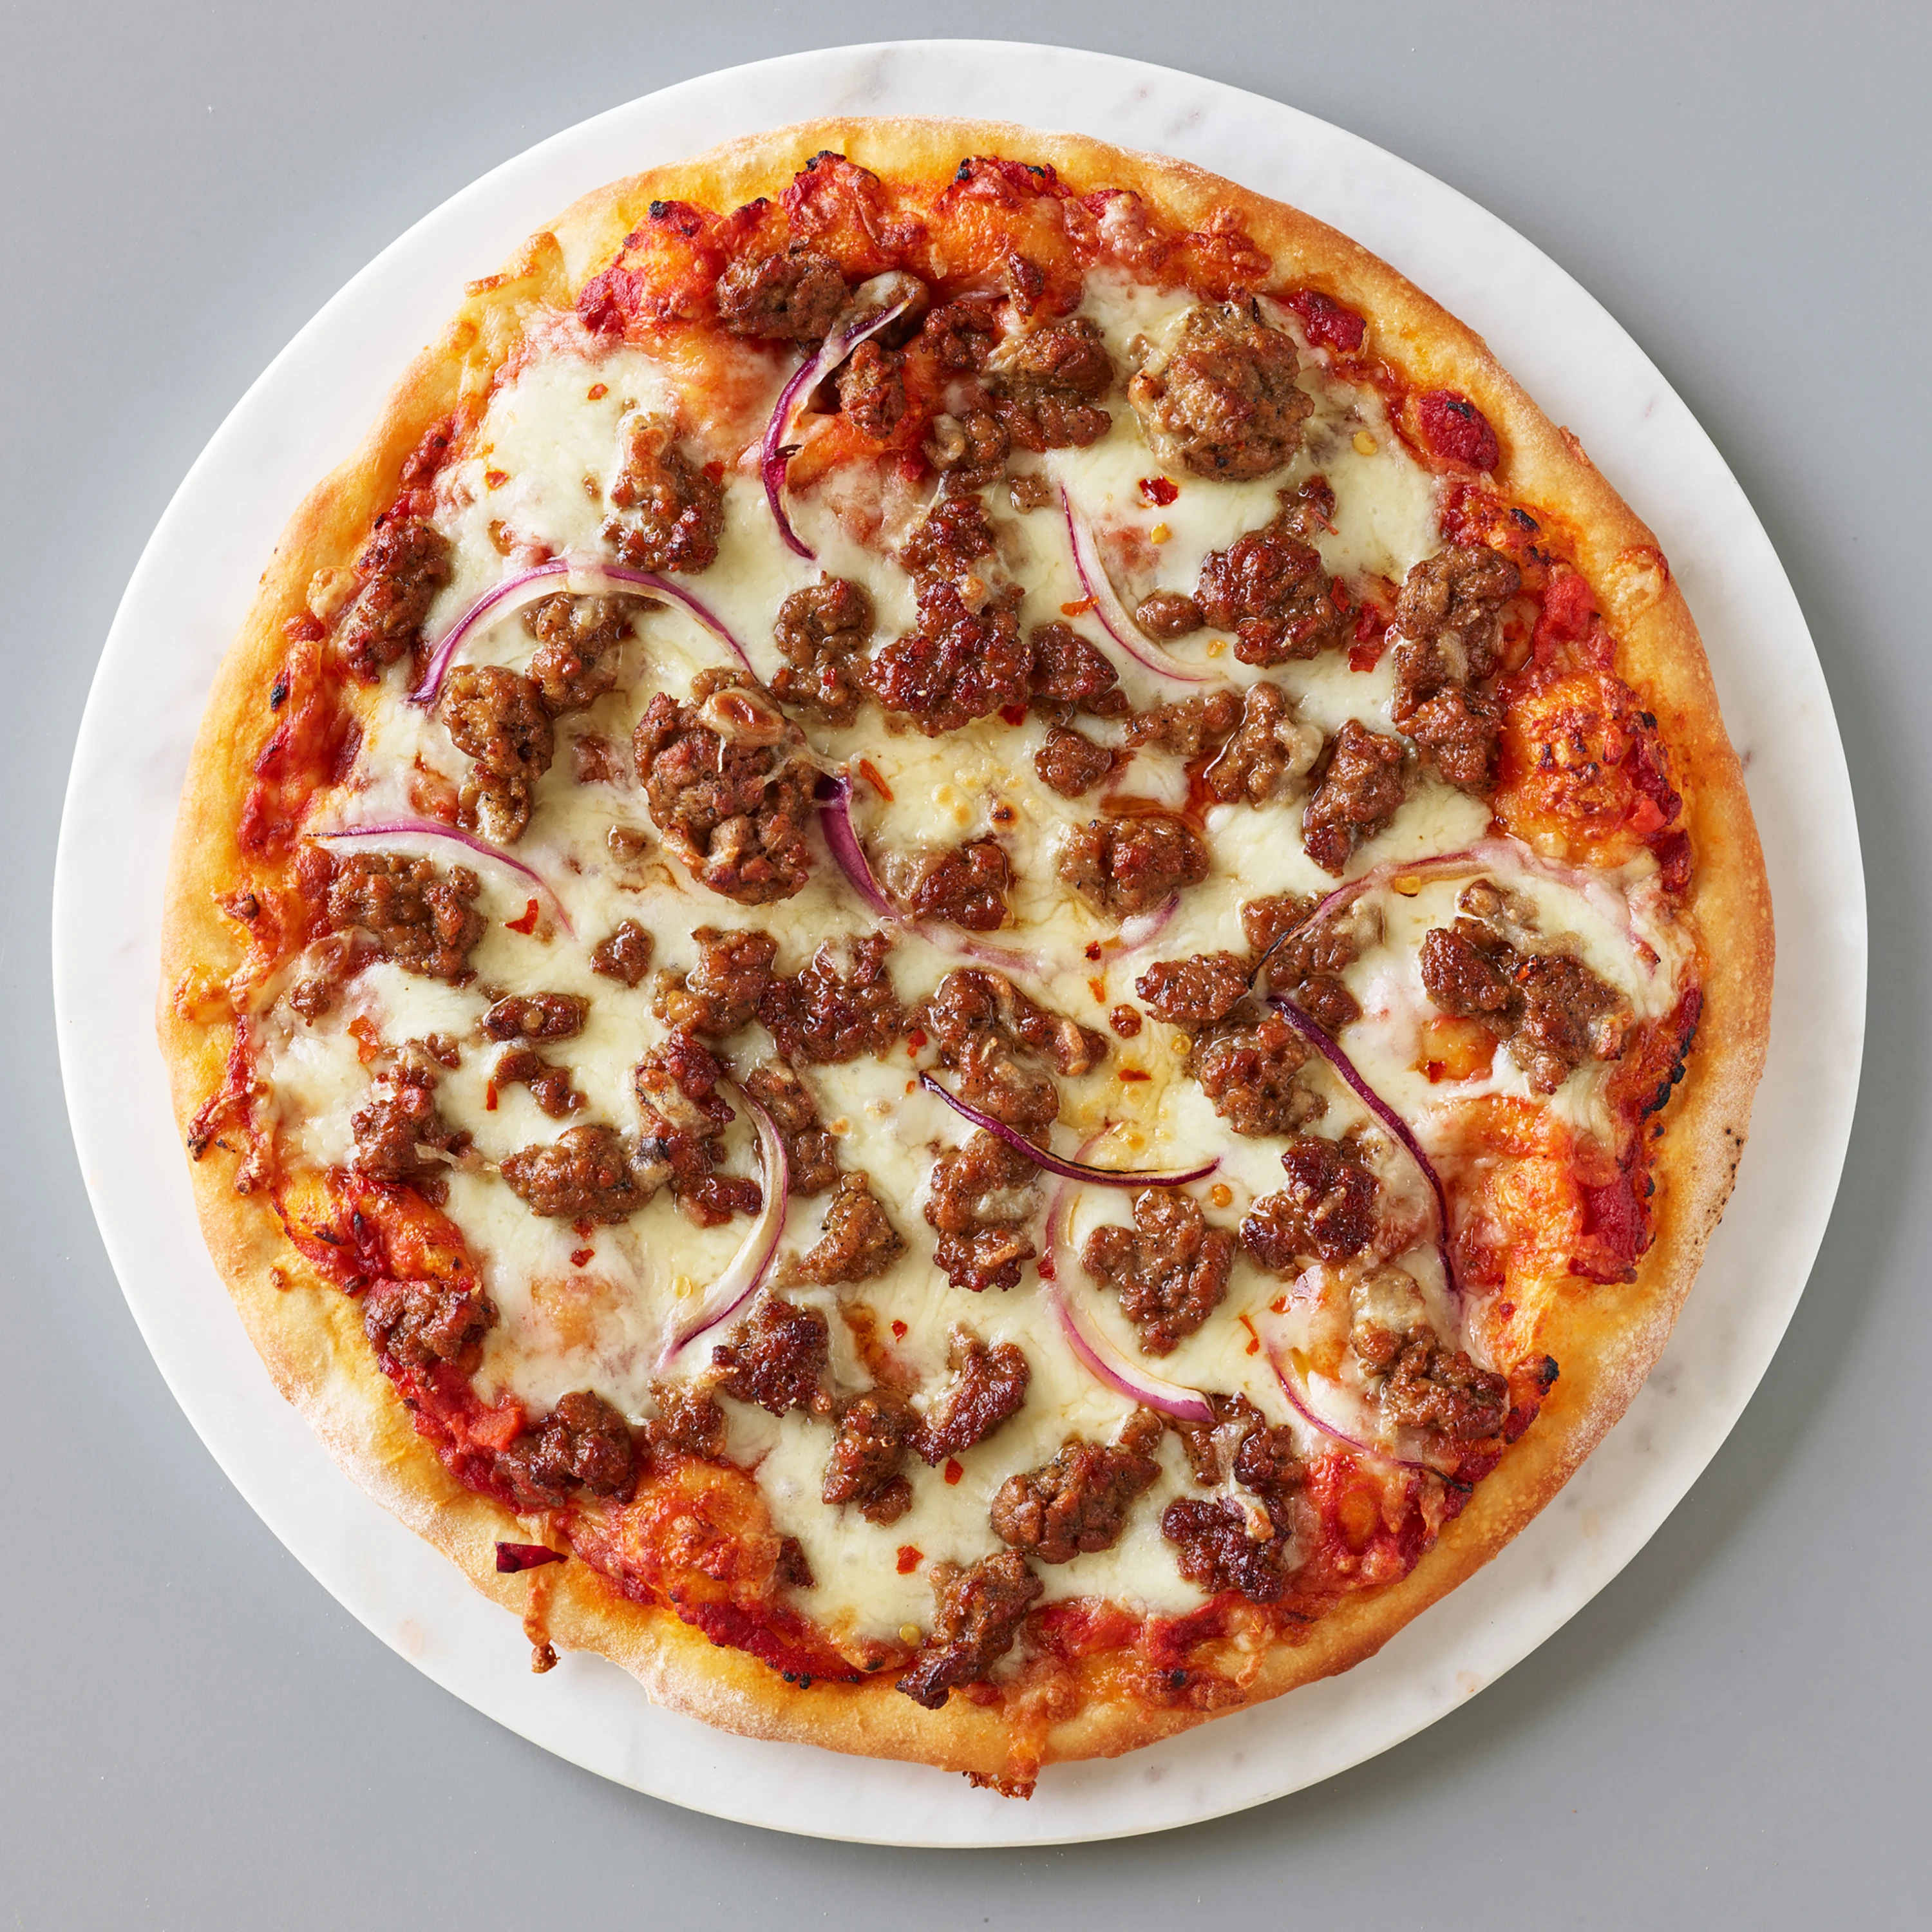 Impossible Sausage on a pizza